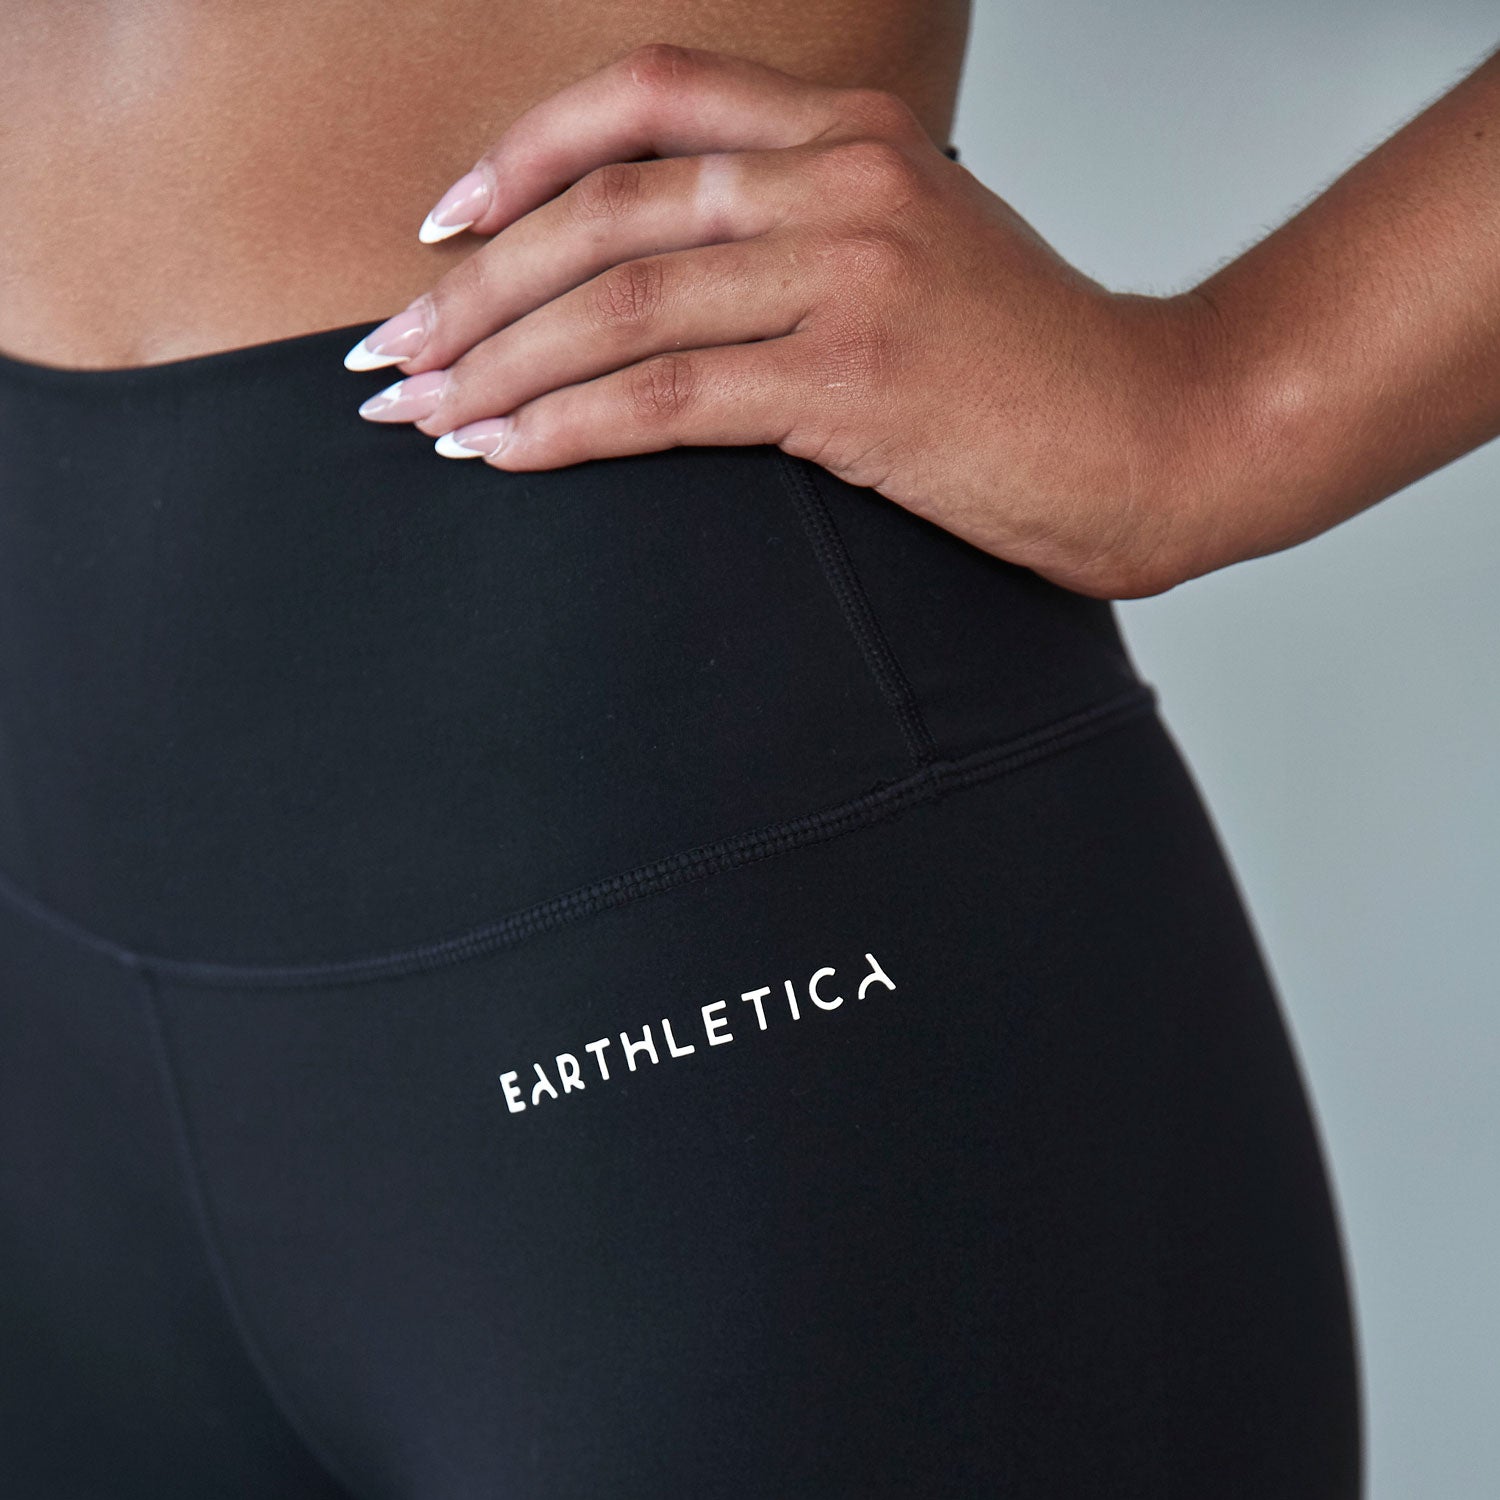 A close up image of stitching and finishings on a pair of Earthletica activewear shorts